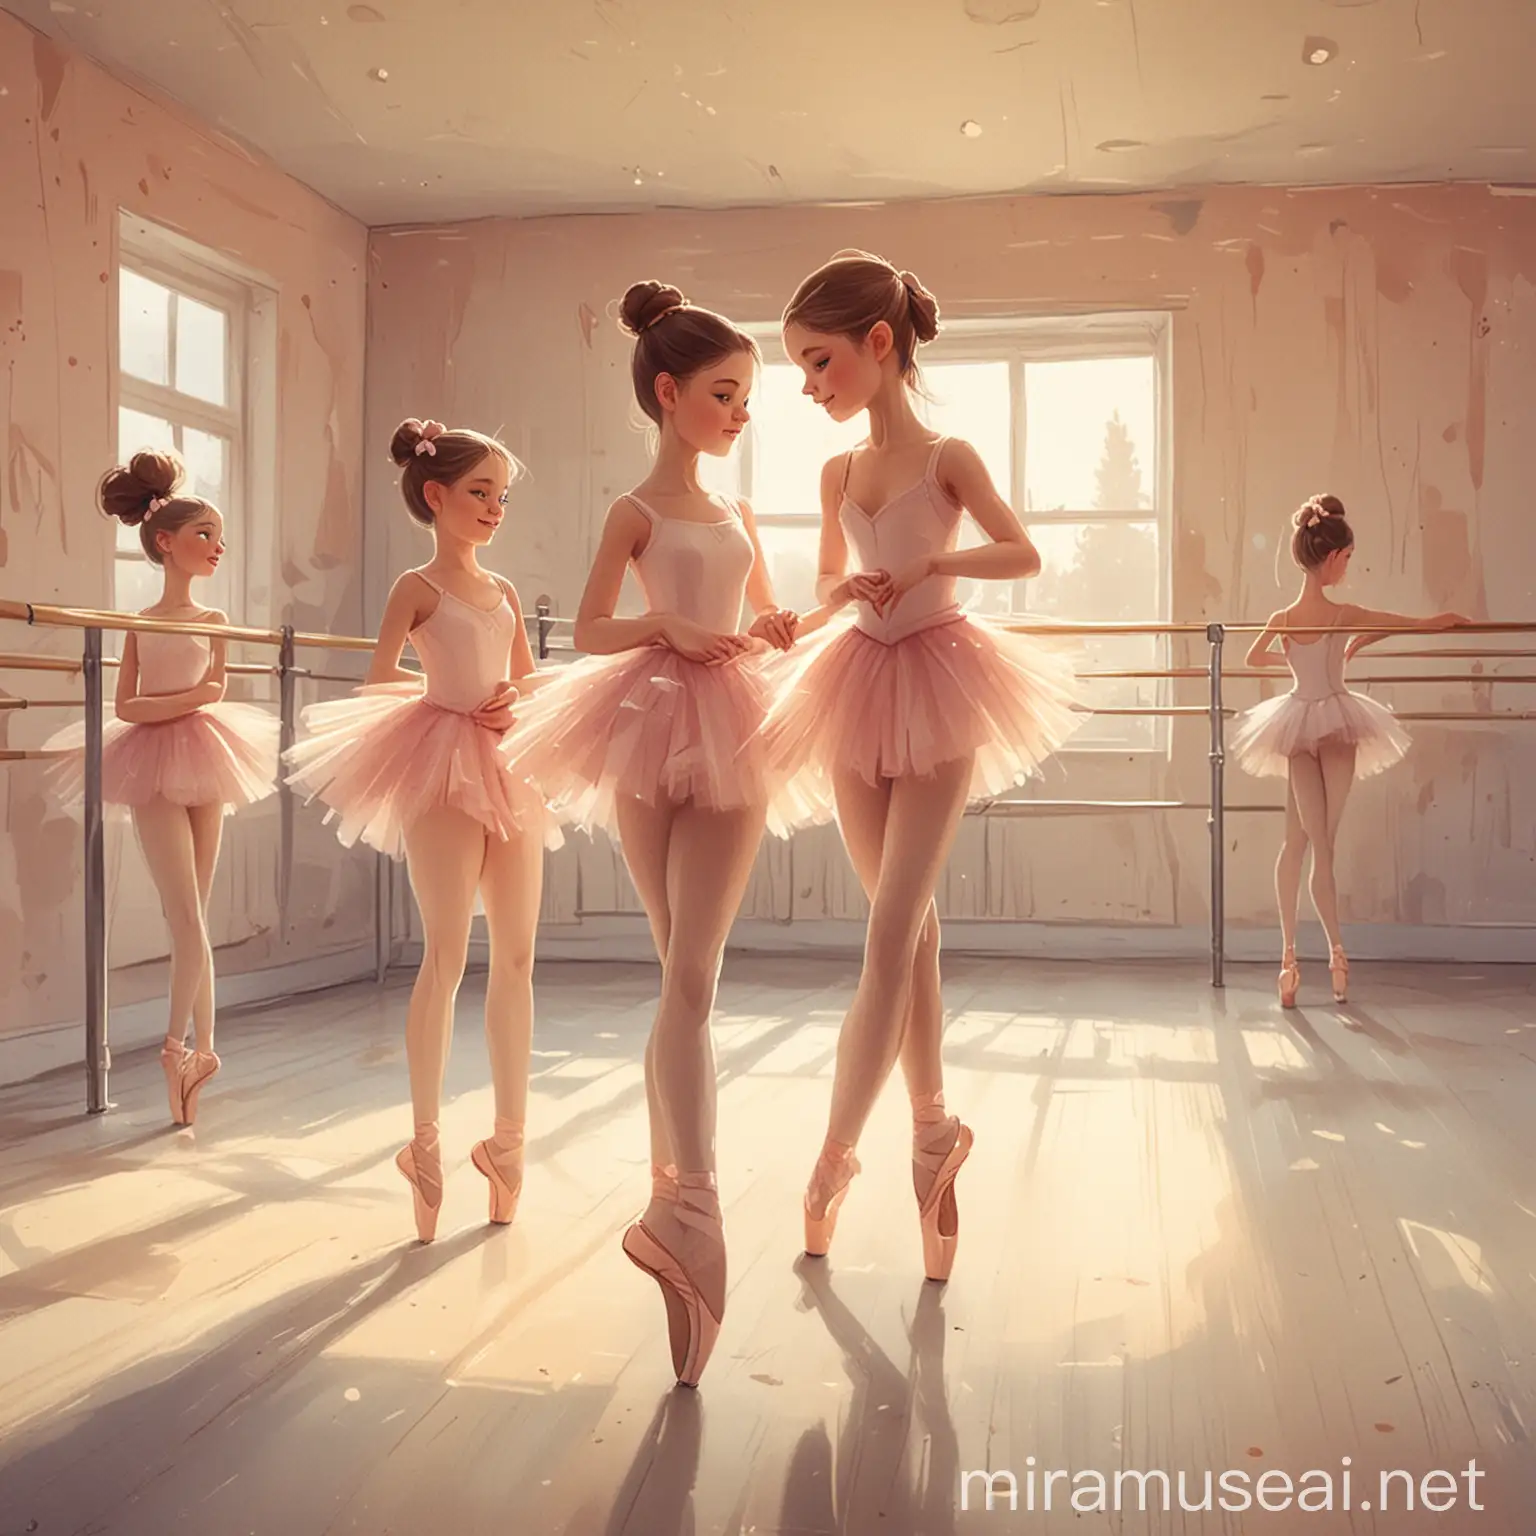  cartoon style image of ballerinas standing on pointe in a dance studio 